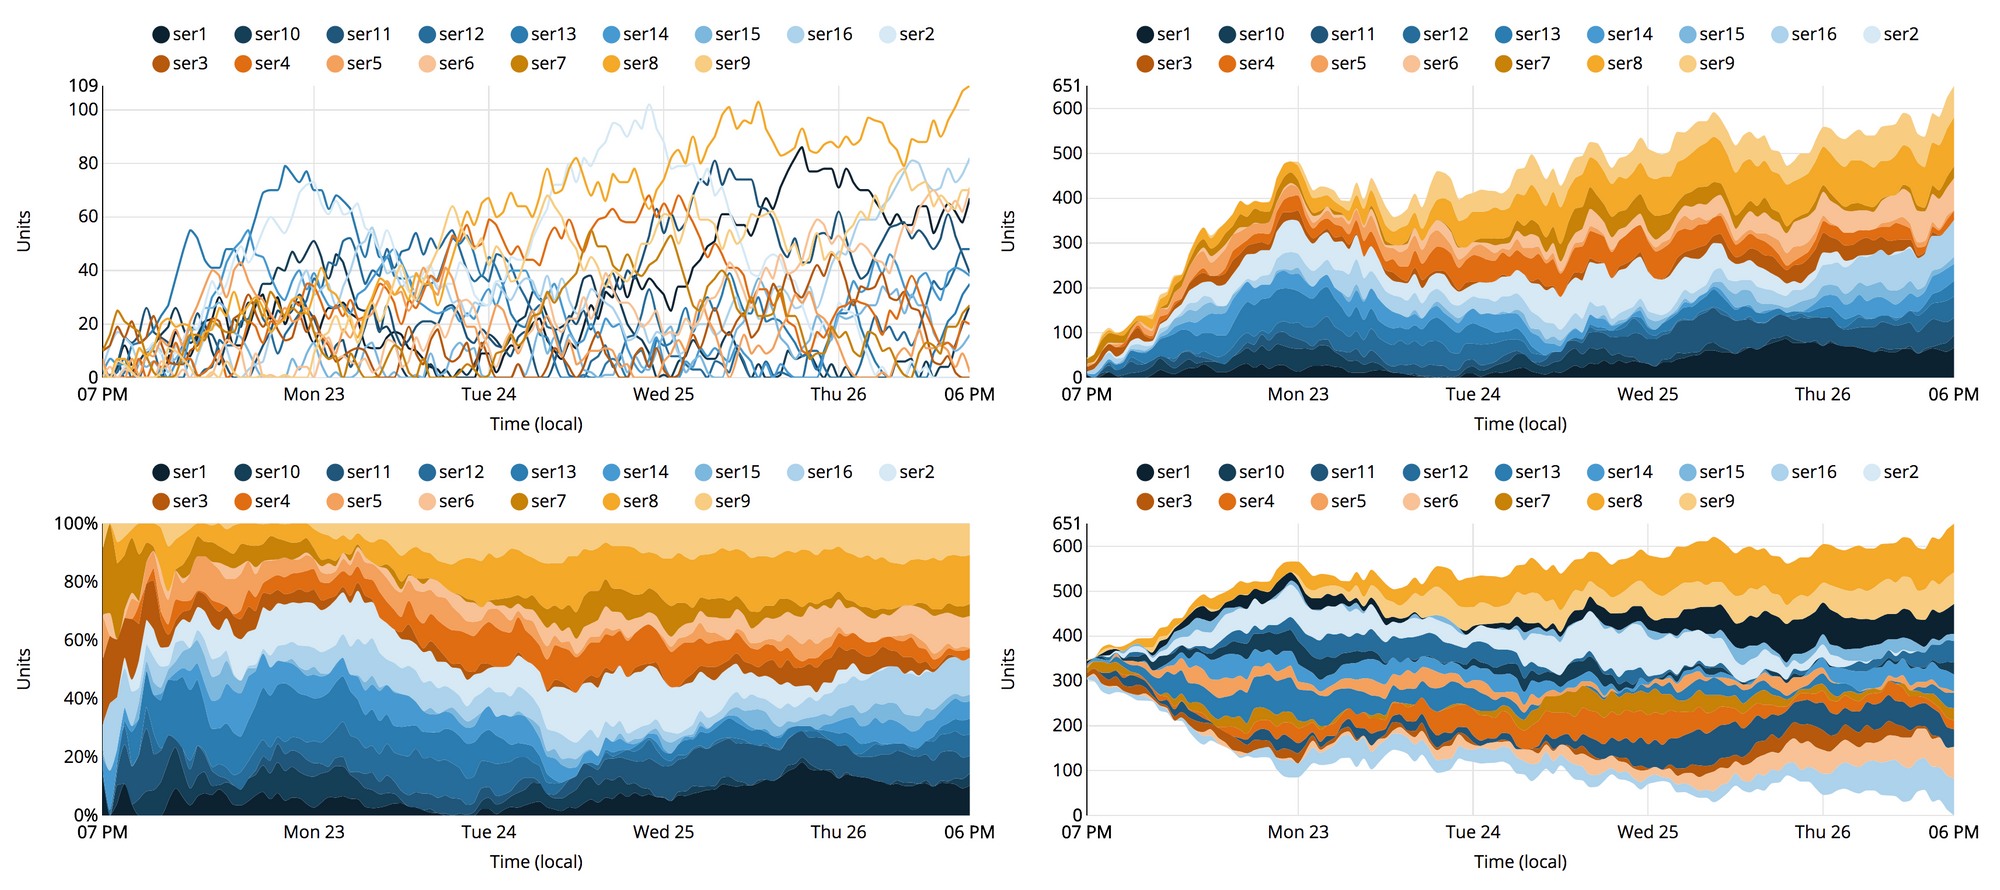 Analytics charts with a blues and oranges. Telling the colors of the lines apart is a different visual experience than separating out the dots in sequential order as they appear in the legend.